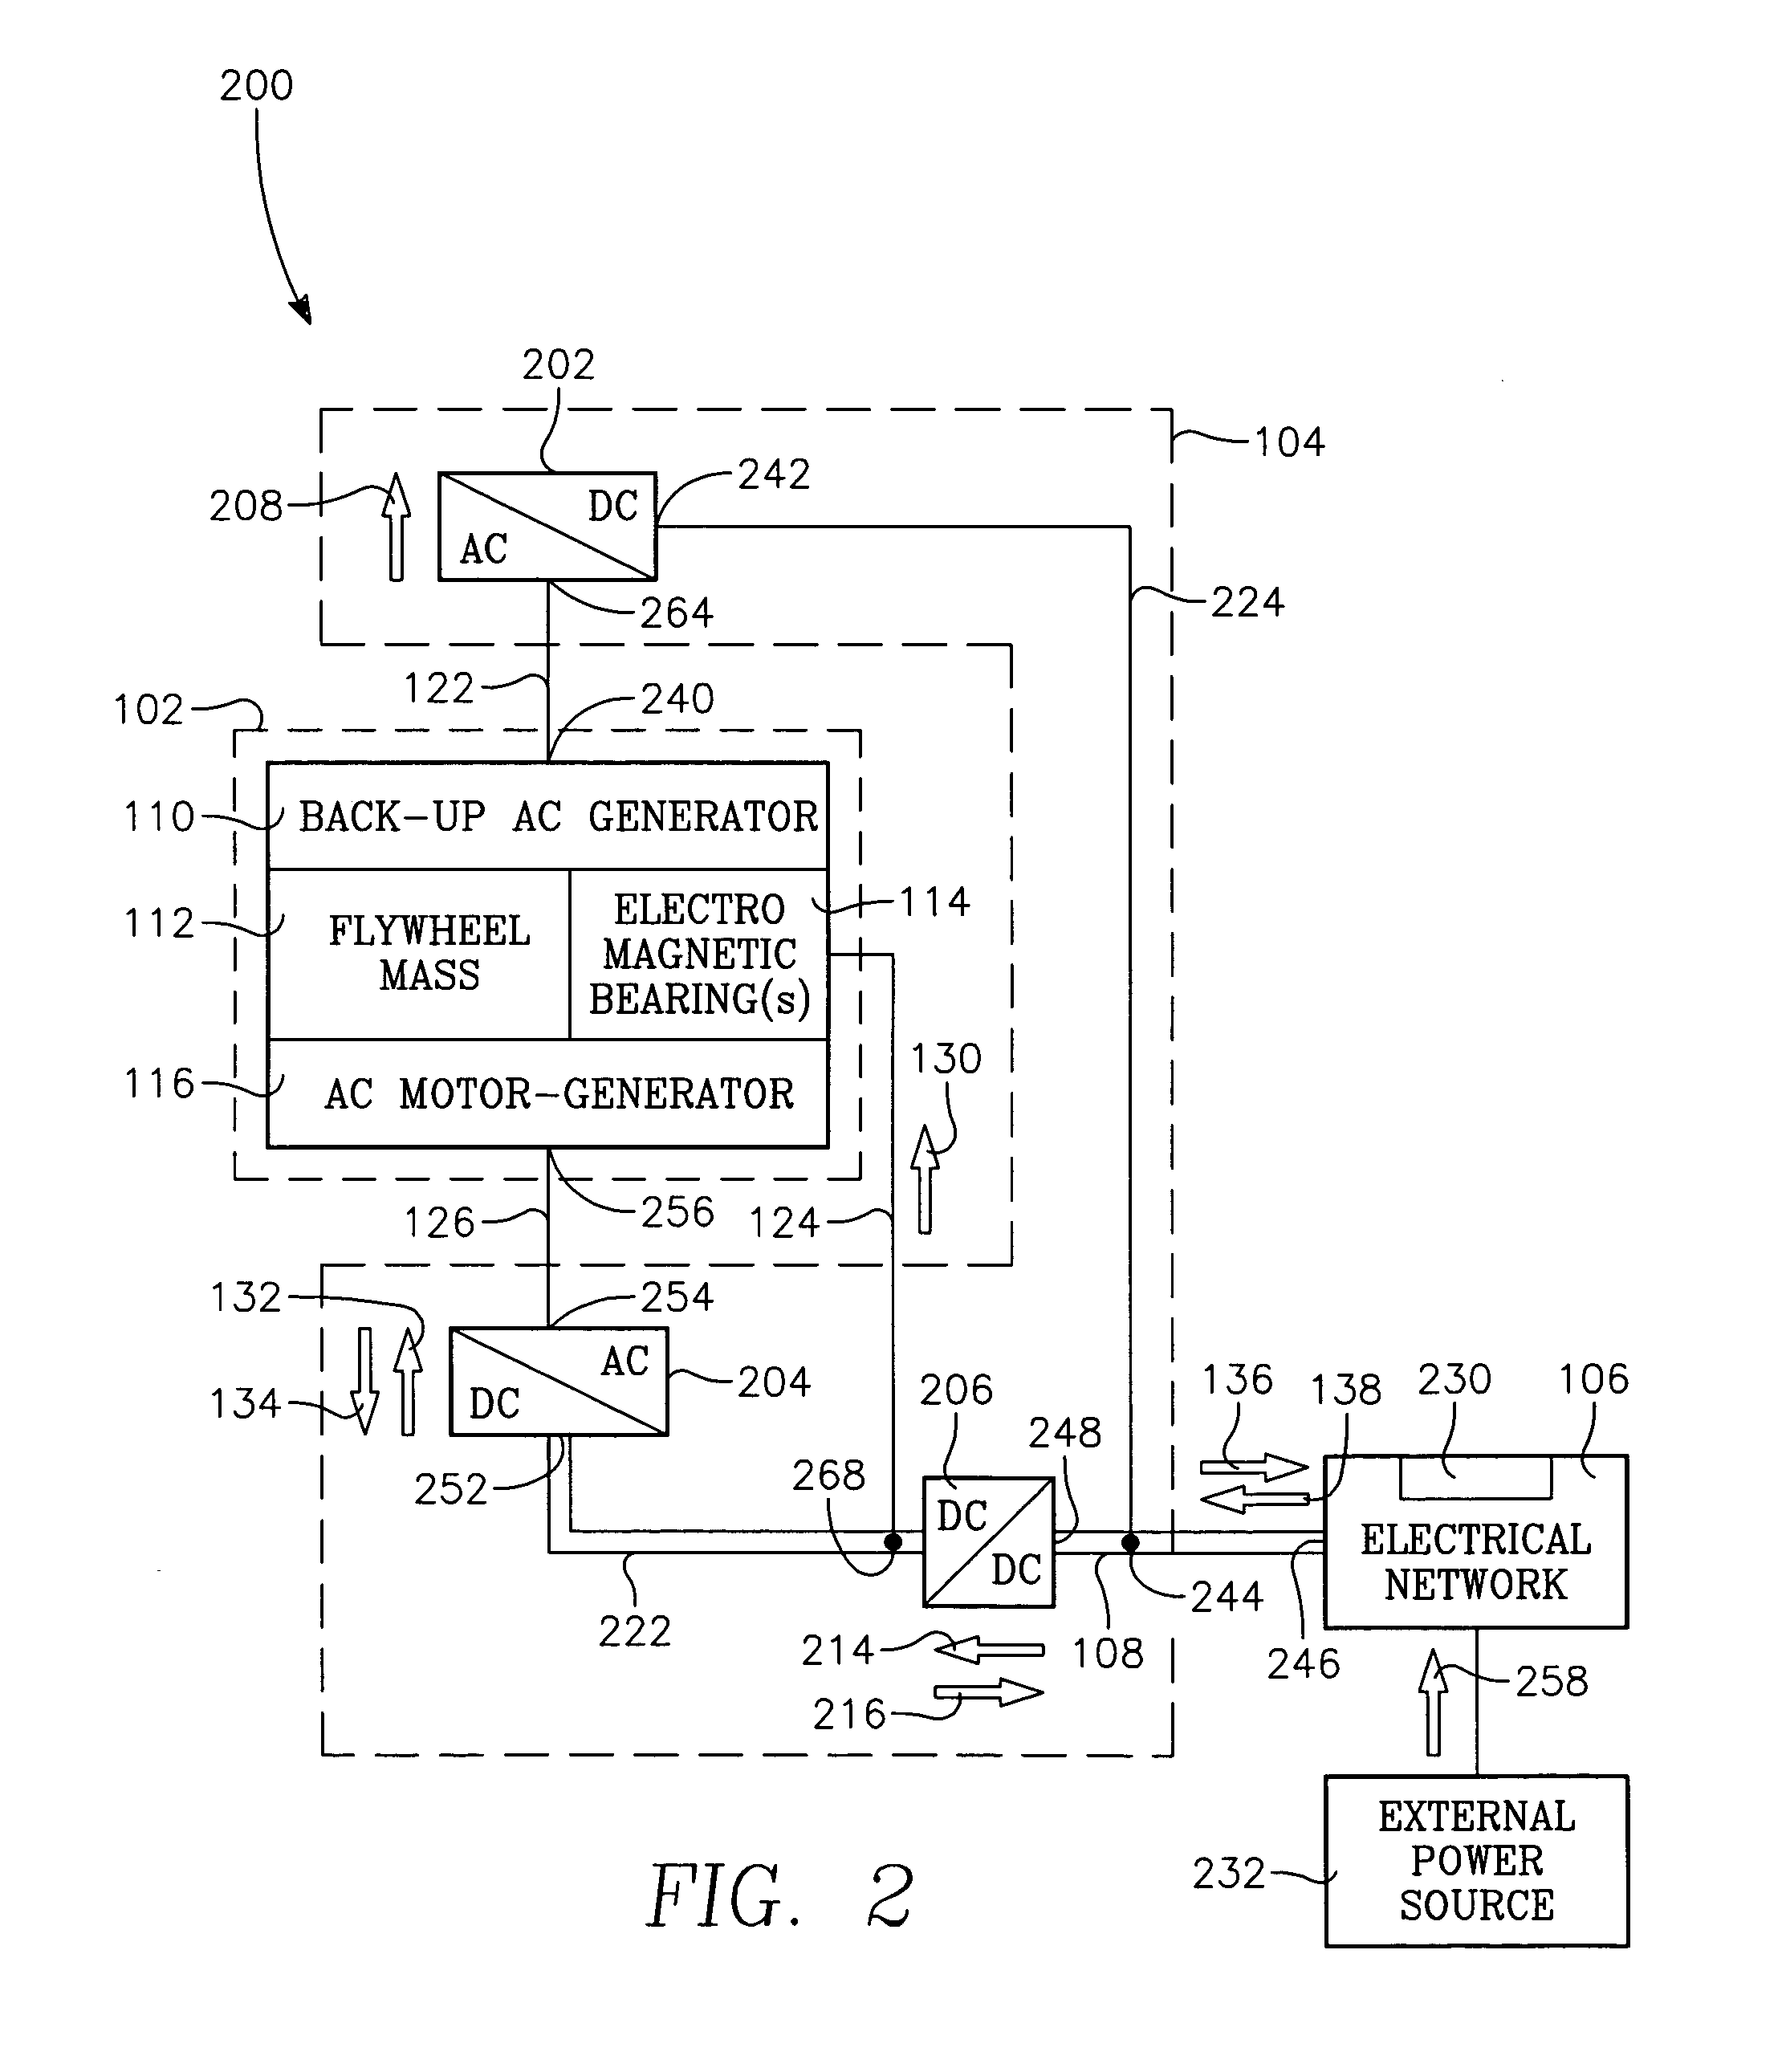 Flywheel system with synchronous reluctance and permanent magnet generators